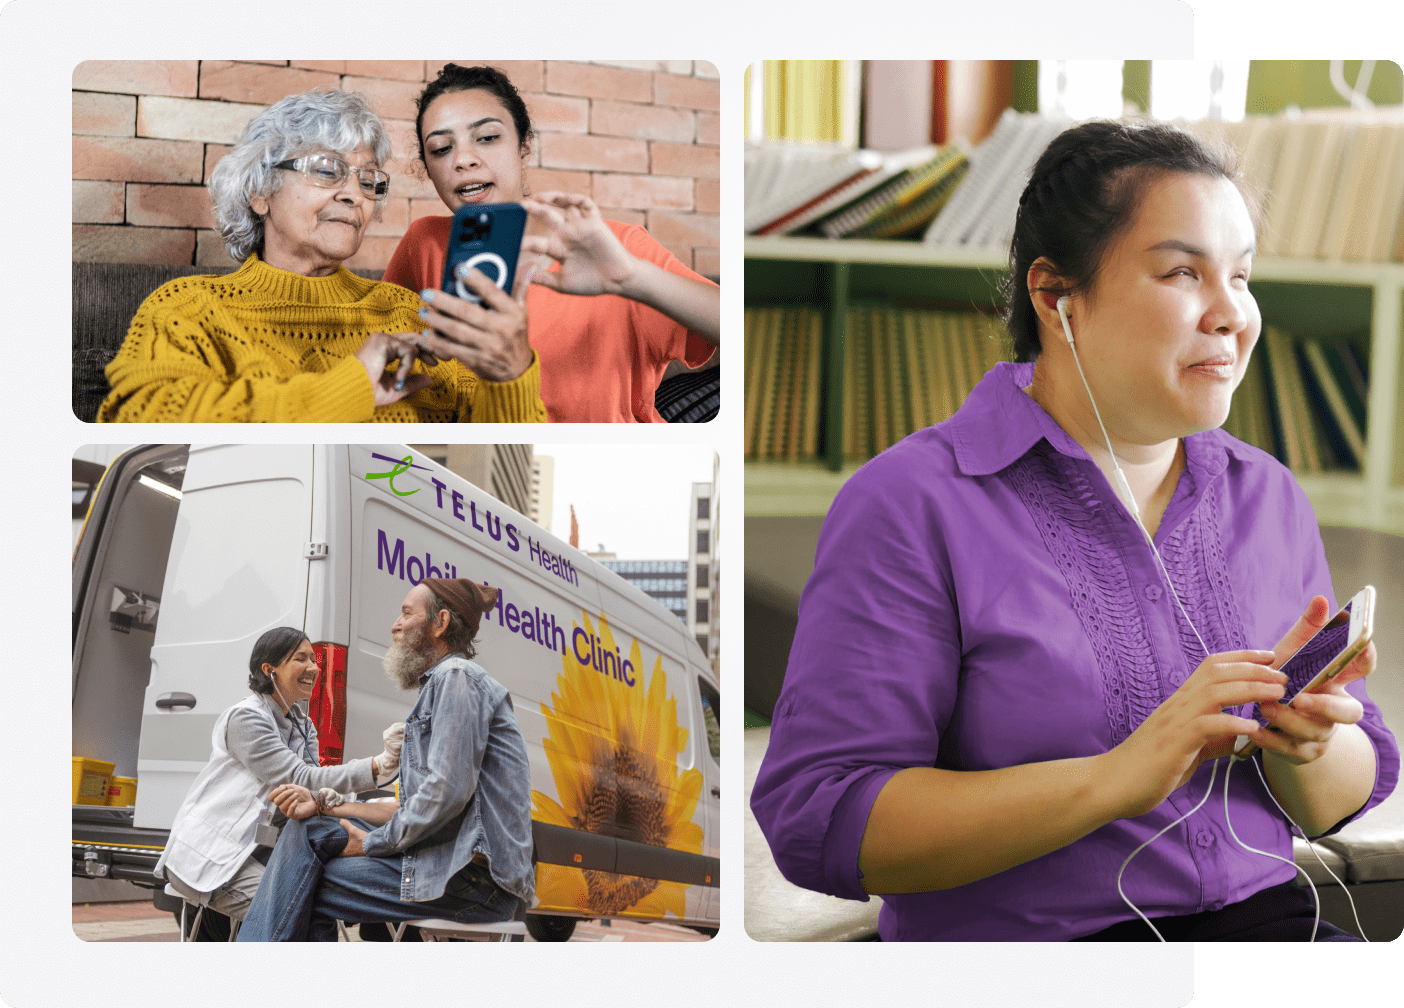 A collage of images: A younger woman and older woman viewing a smartphone together; a person wearing headphones plugged into a smartphone; and a TELUS Mobile Health Clinic team member attending to a patient.